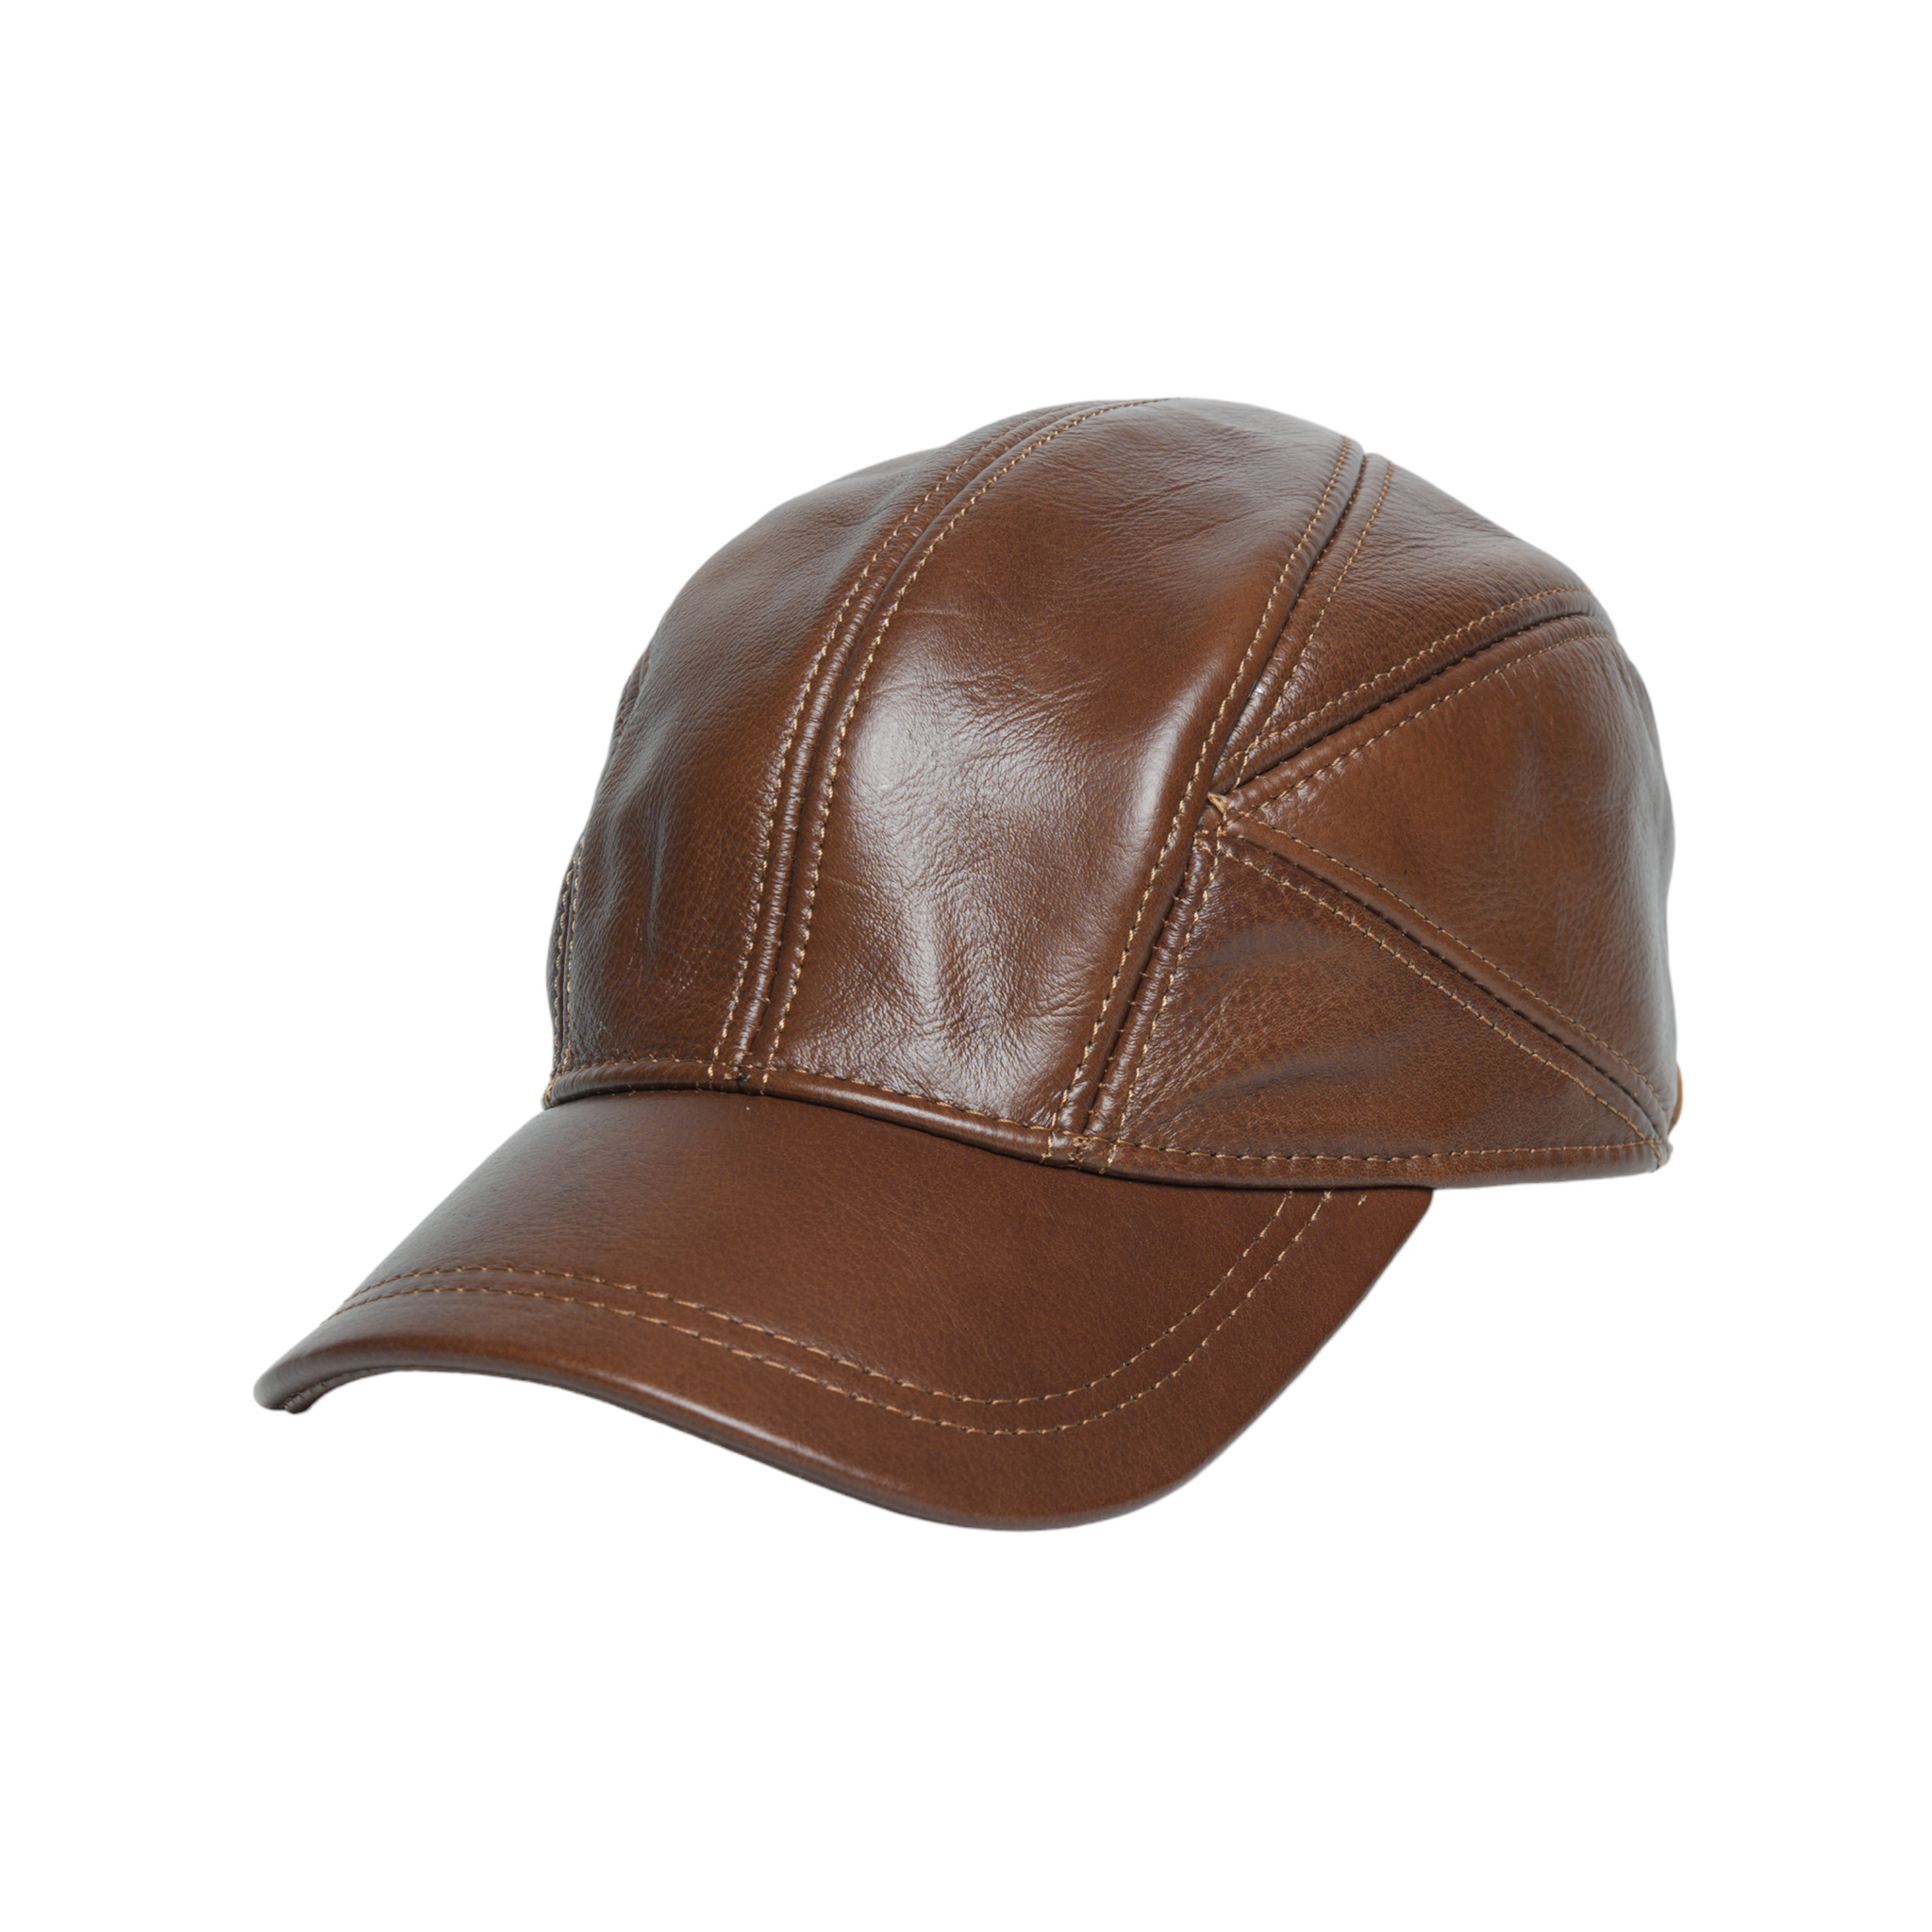 Chokore Vintage Leather Baseball Cap with Ear Protector (Light Brown)